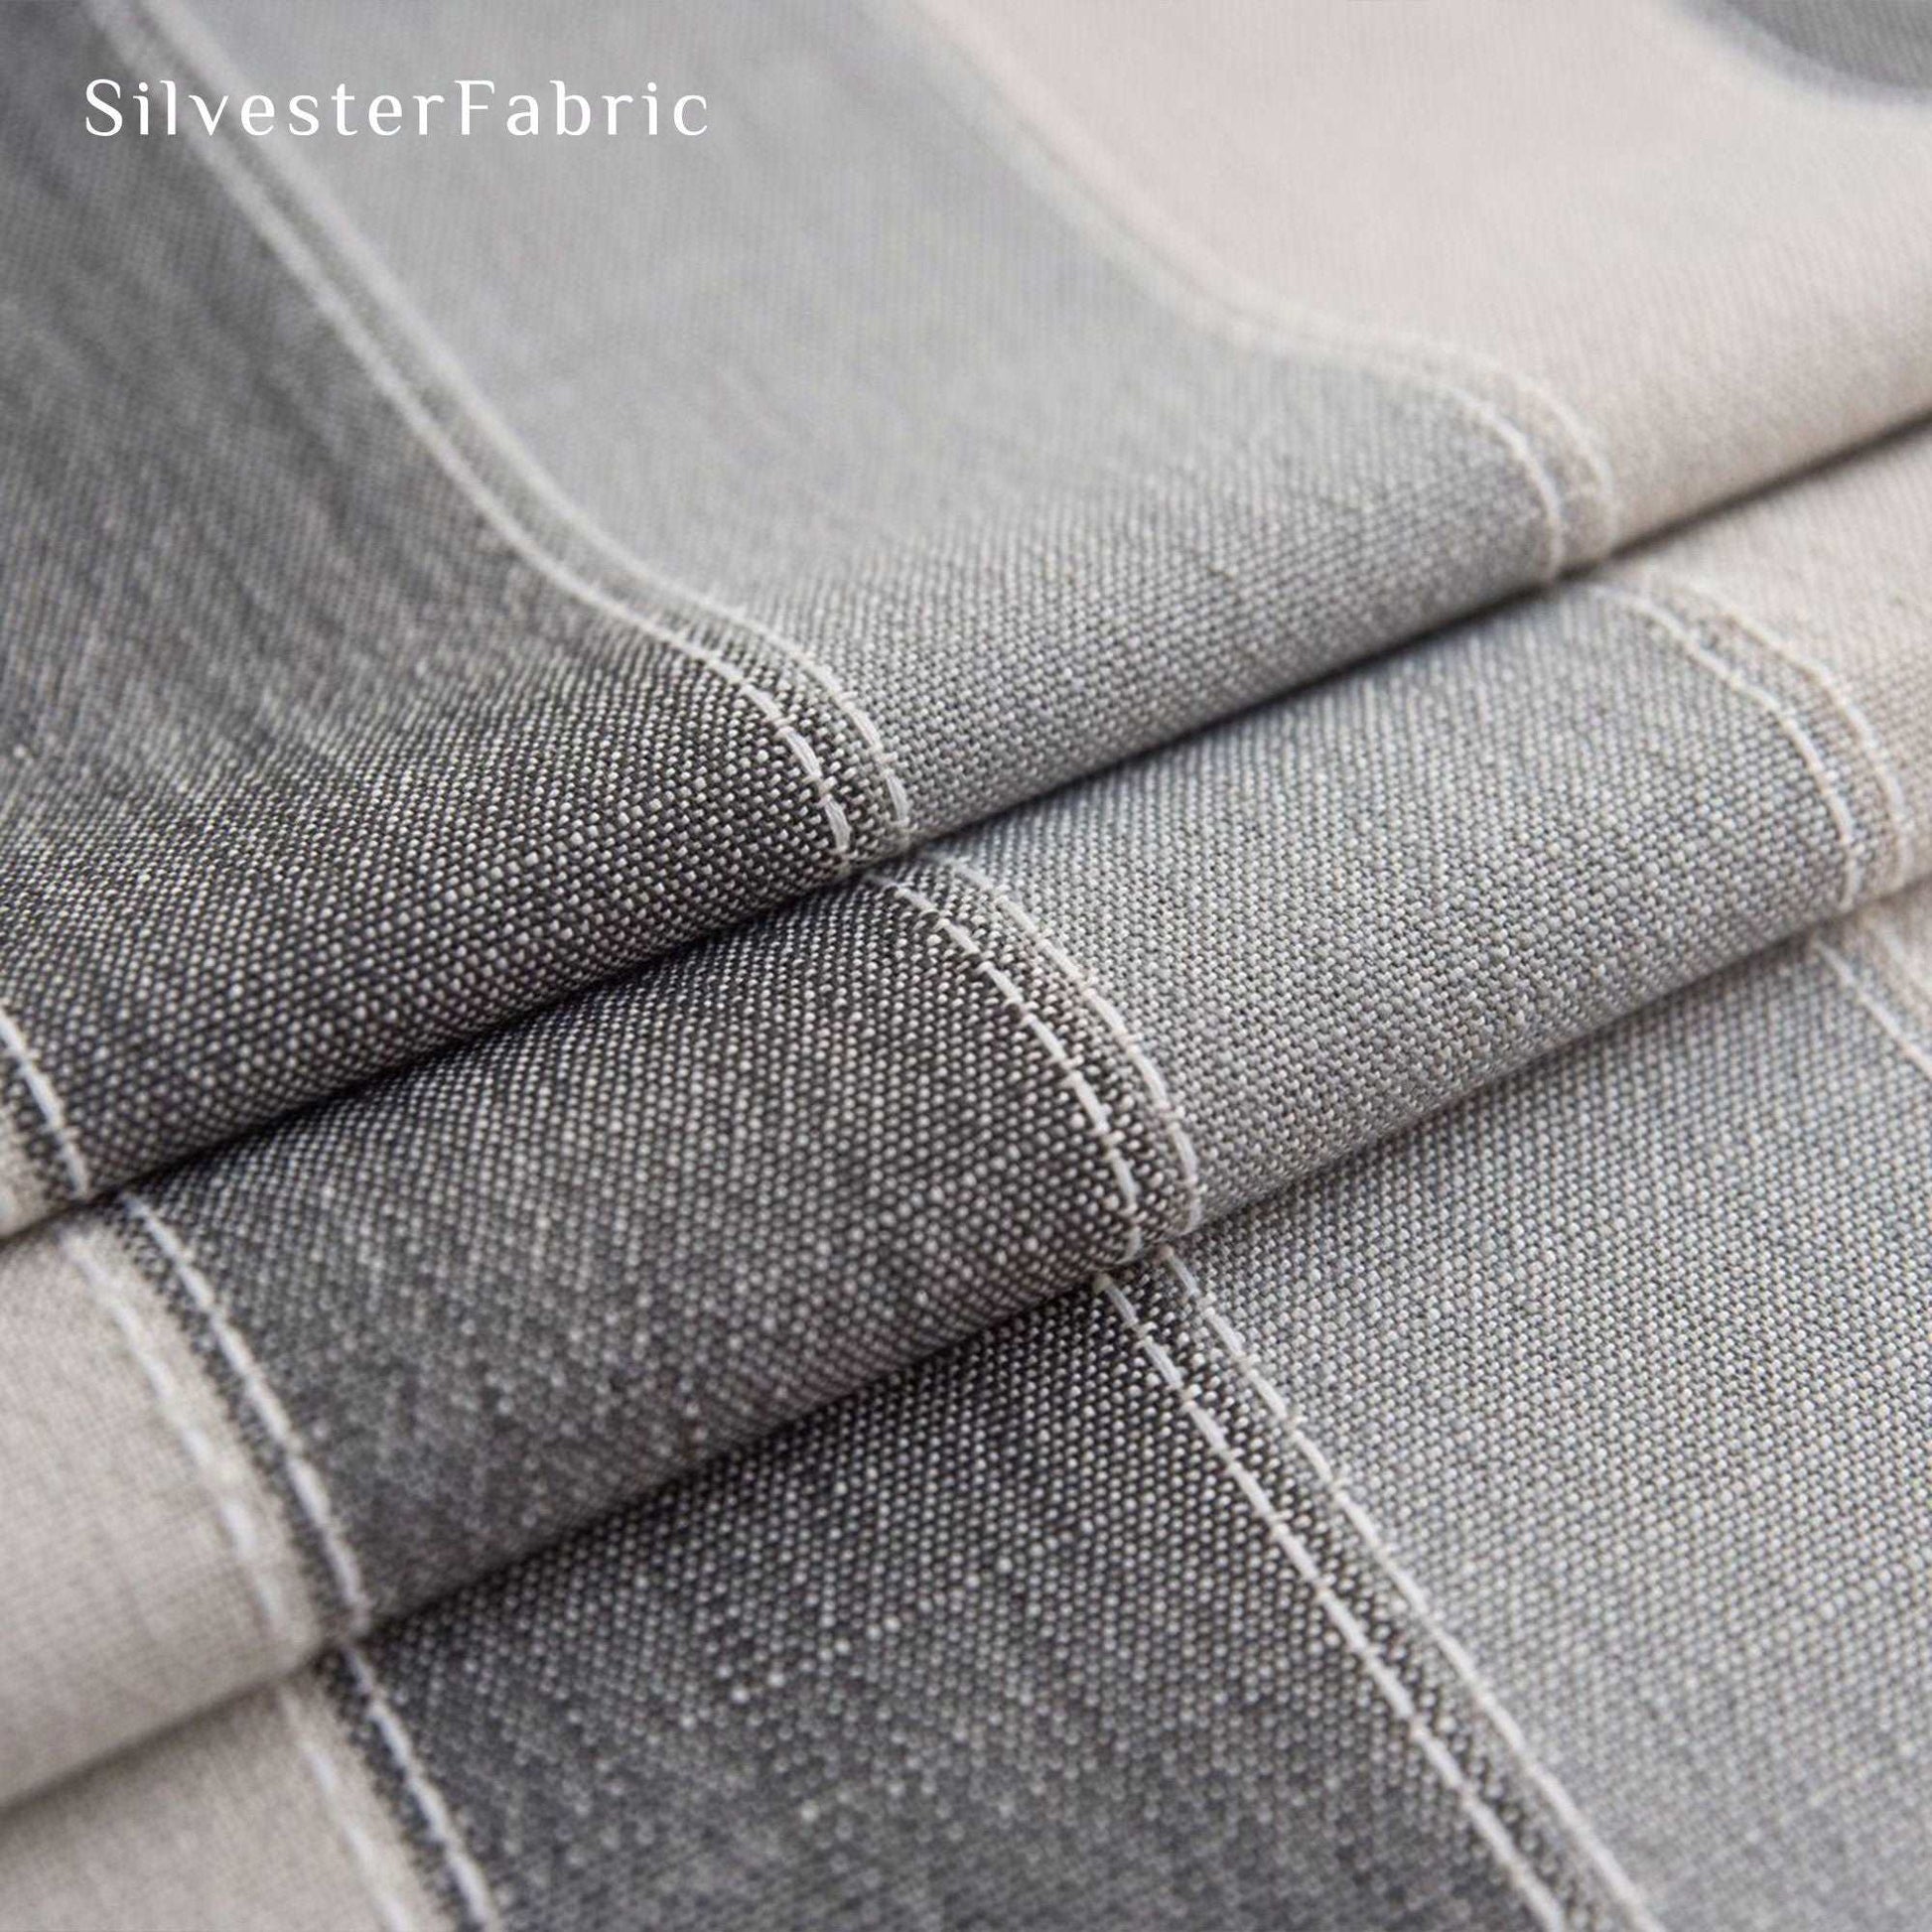 Striped Rustic Grey Rectangle Vintage Outdoor Cotton Linen Tablecloths